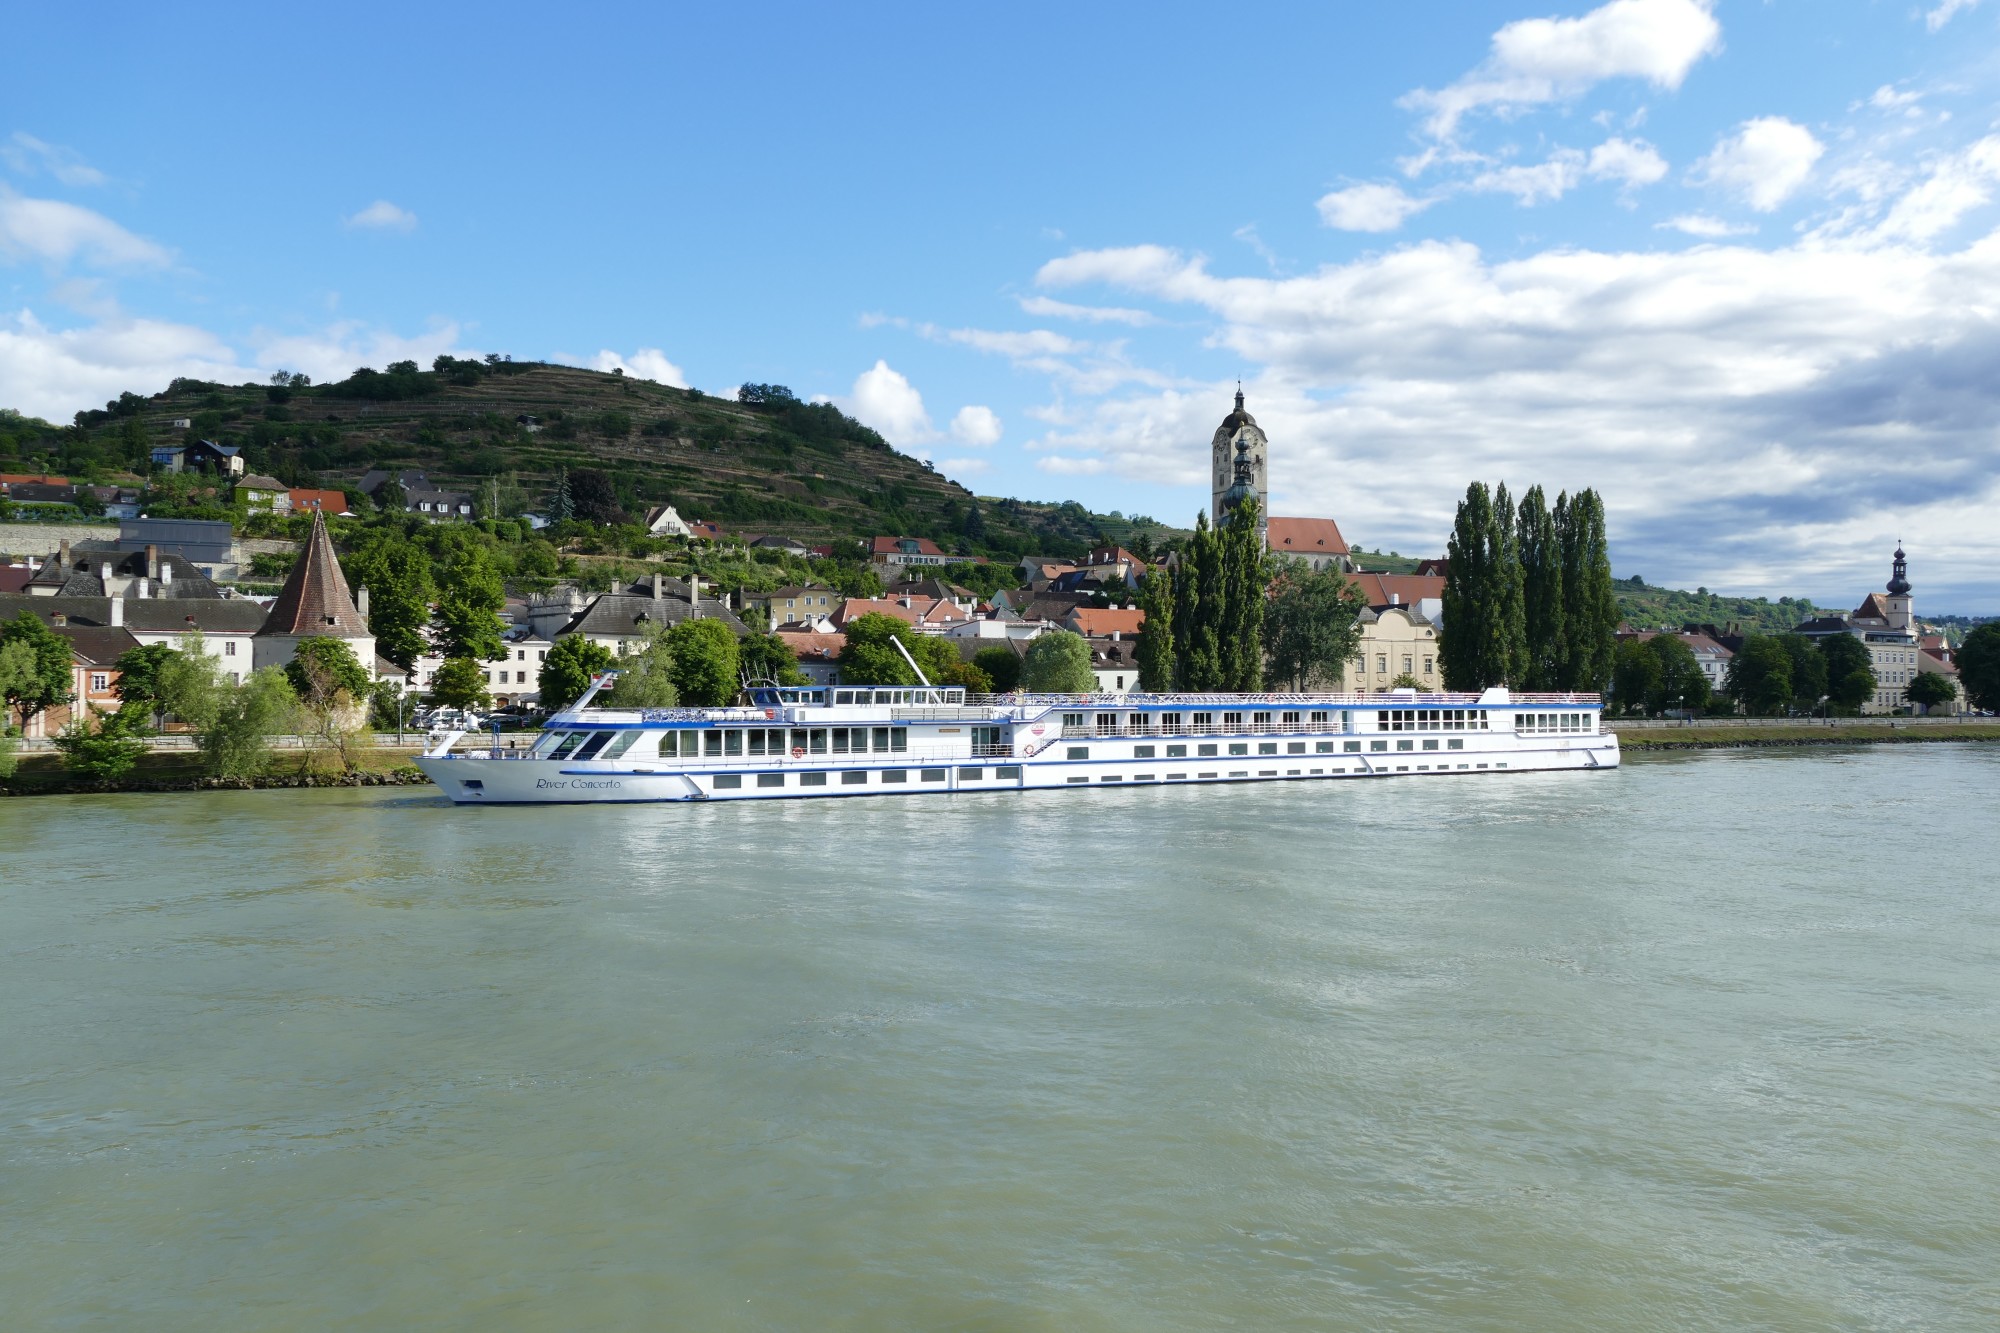 Best Destination Spots to Take a River Cruise in Europe